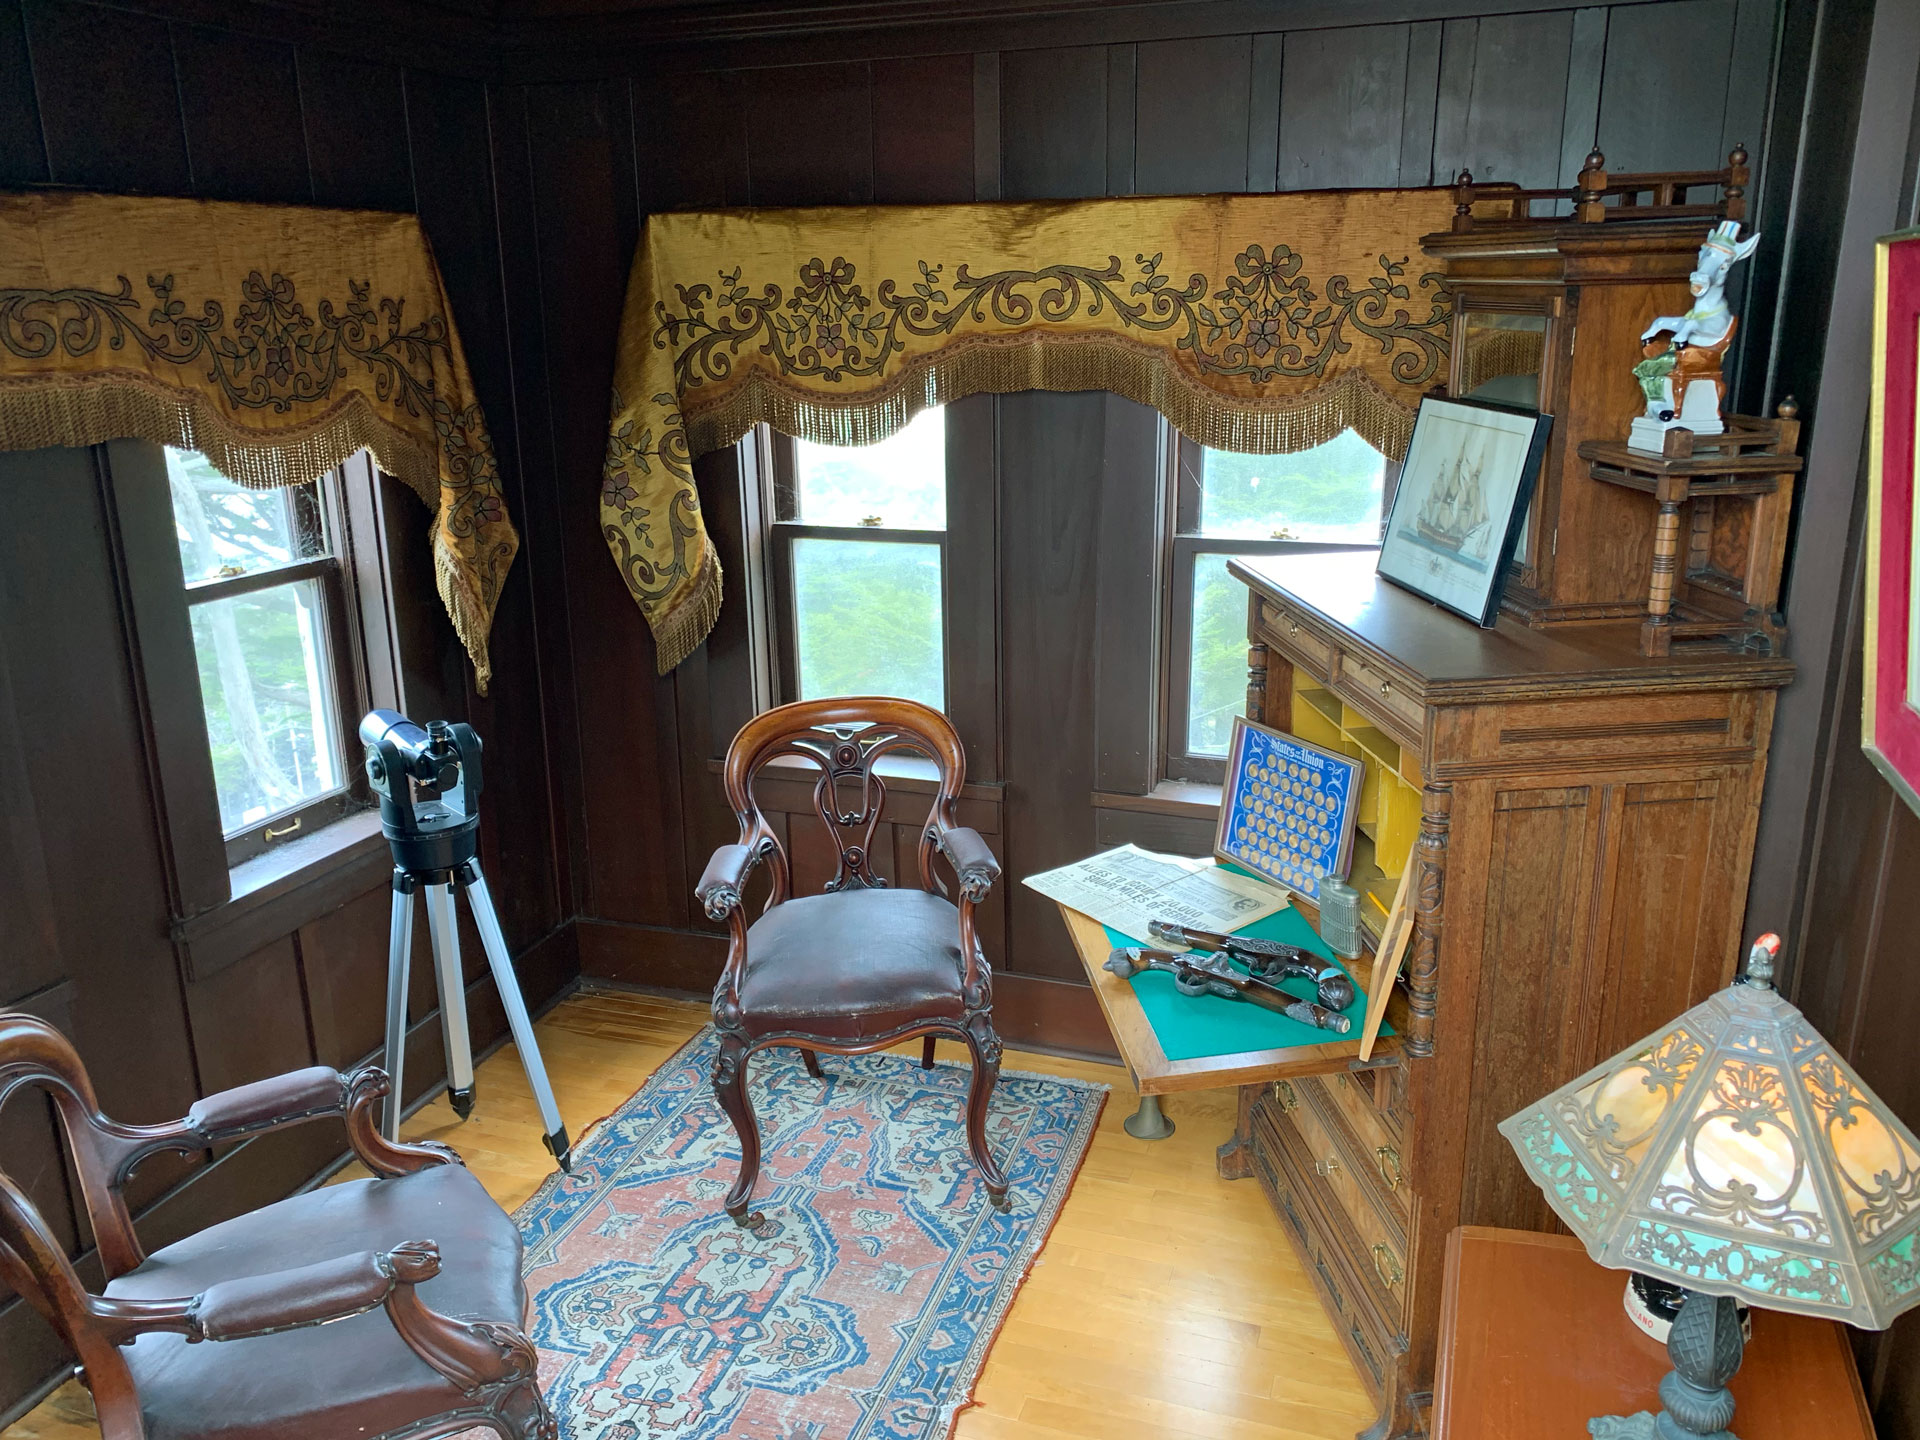 A small room with two chairs, spyglass and desk.